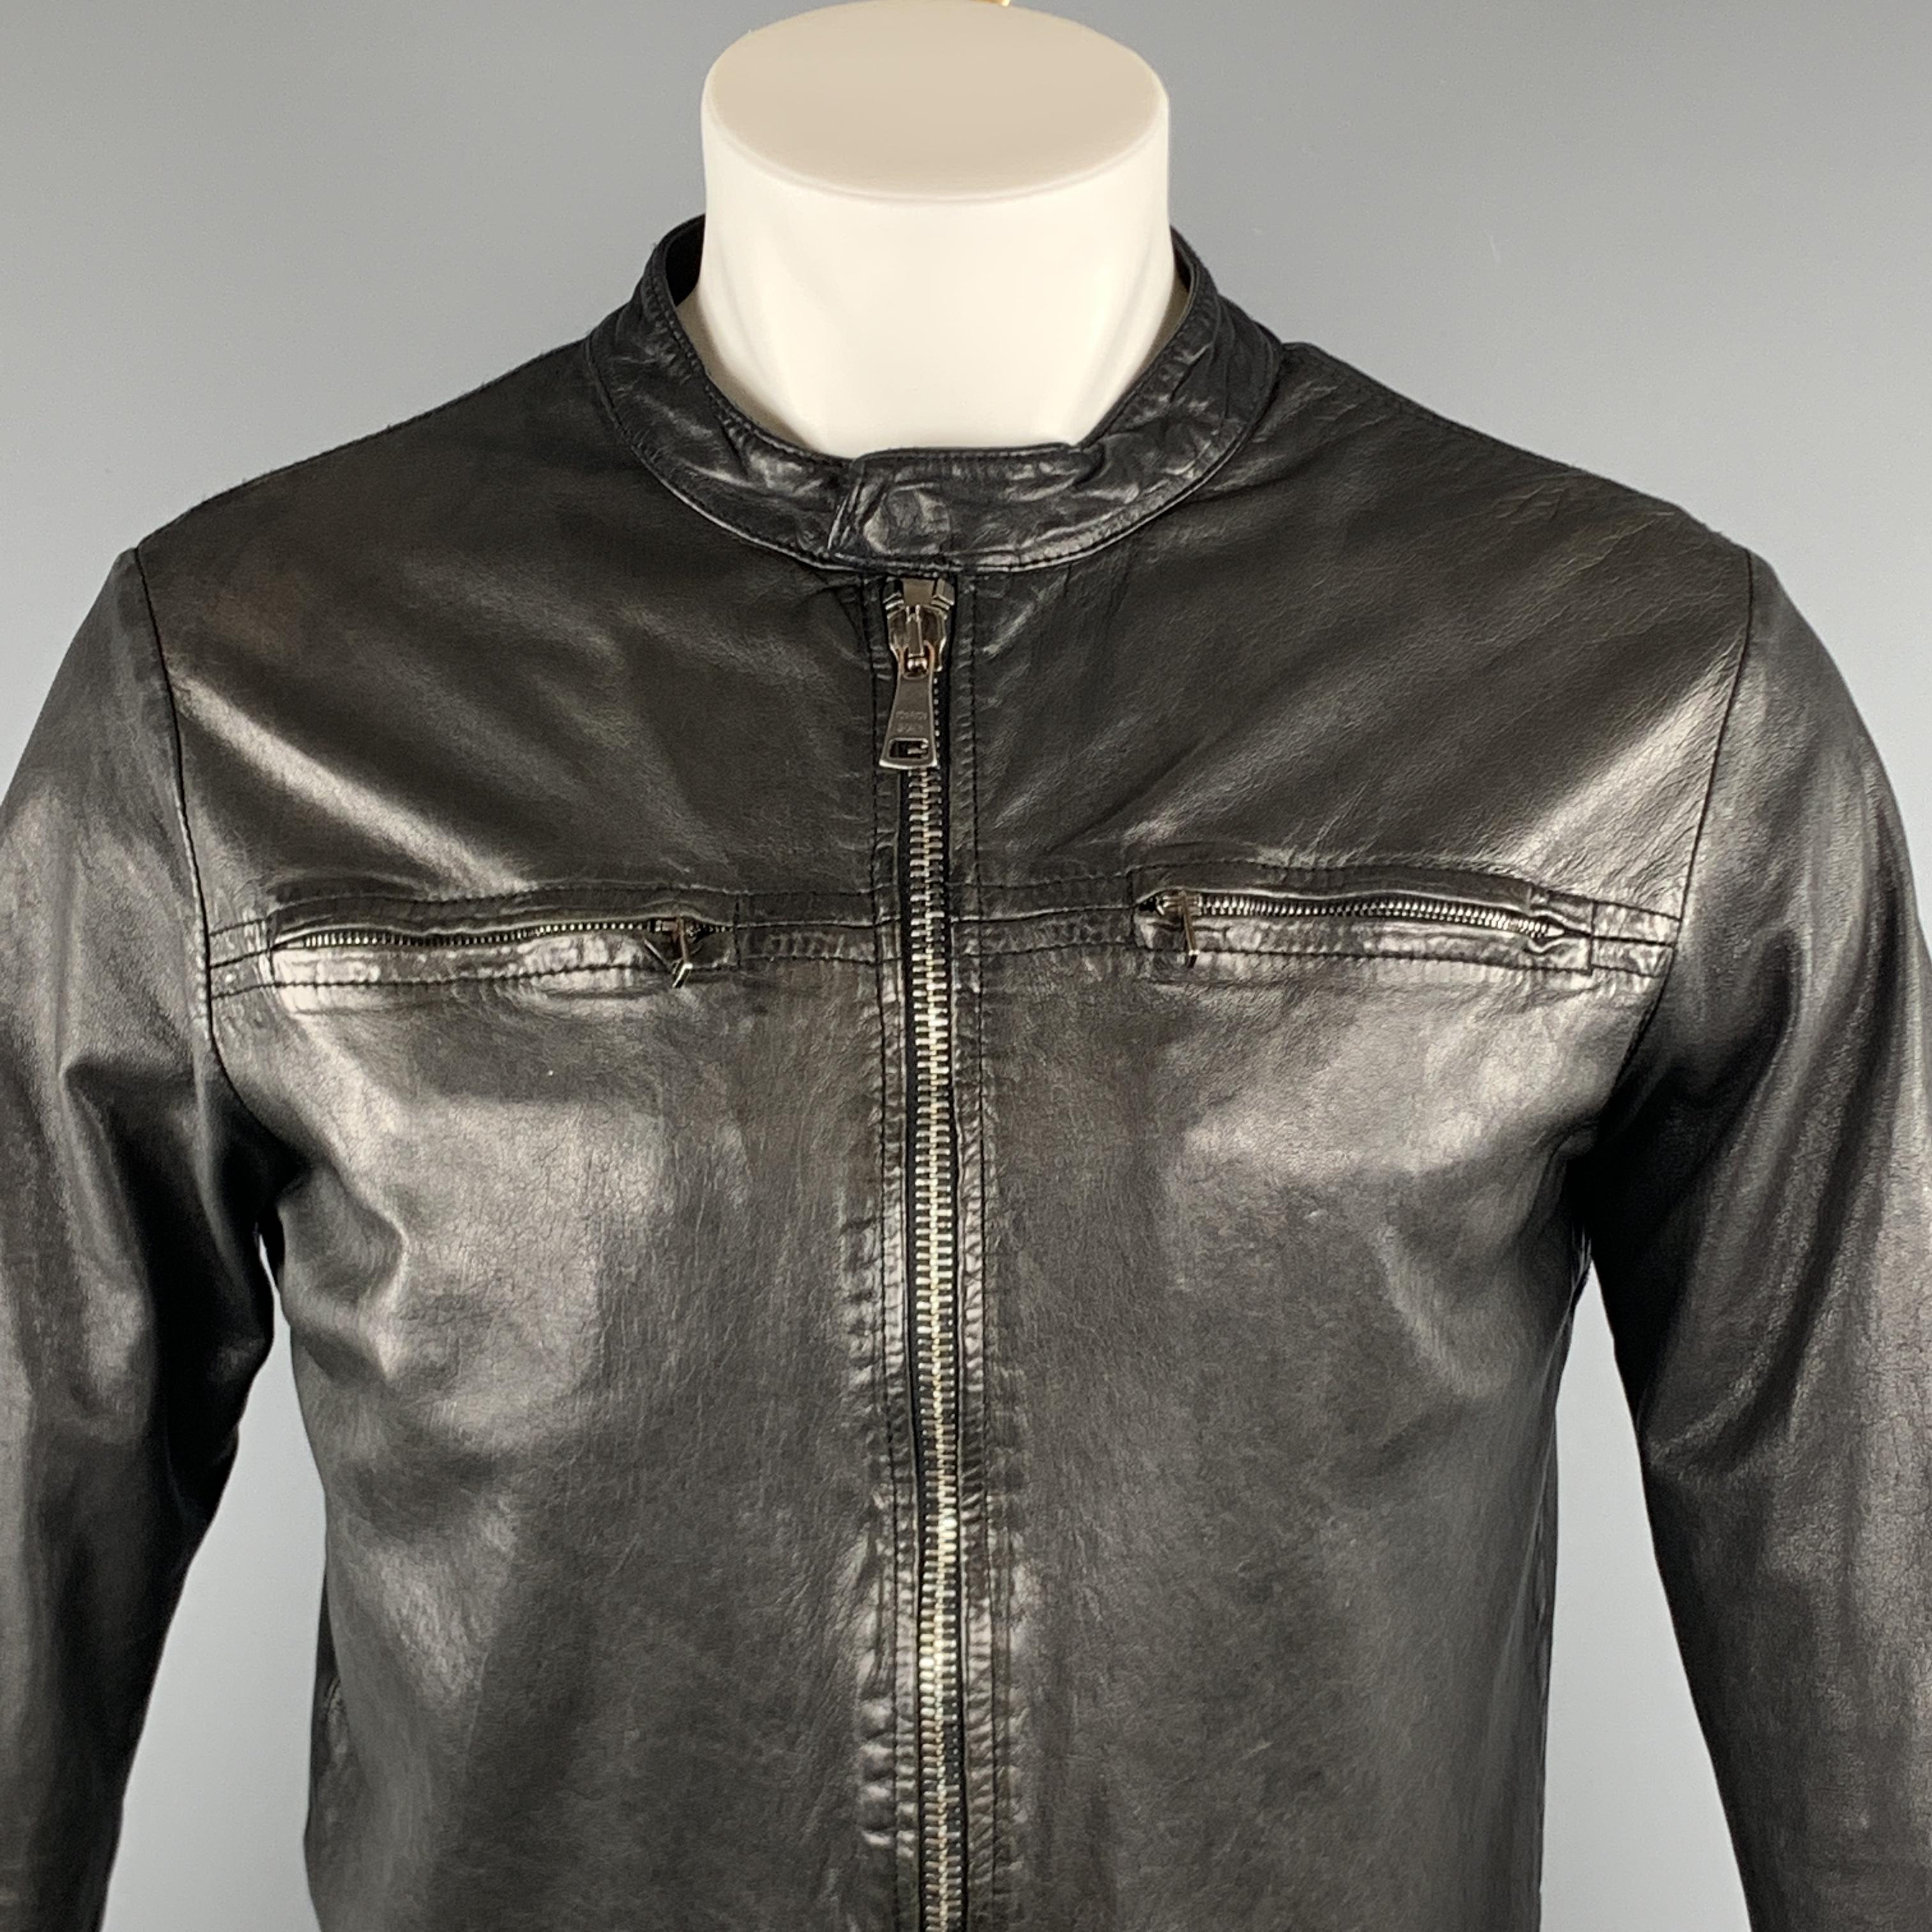 GIORGIO BRATO Jacket comes in a black leather featuring a full zip closure, side zipper sleeves, and front zipper pockets. Made in Italy.
 

Very Good Pre-Owned Condition.
Marked: 48

Measurements:

Shoulder: 18 in.
Chest: 38 in. 
Sleeve: 27 in.